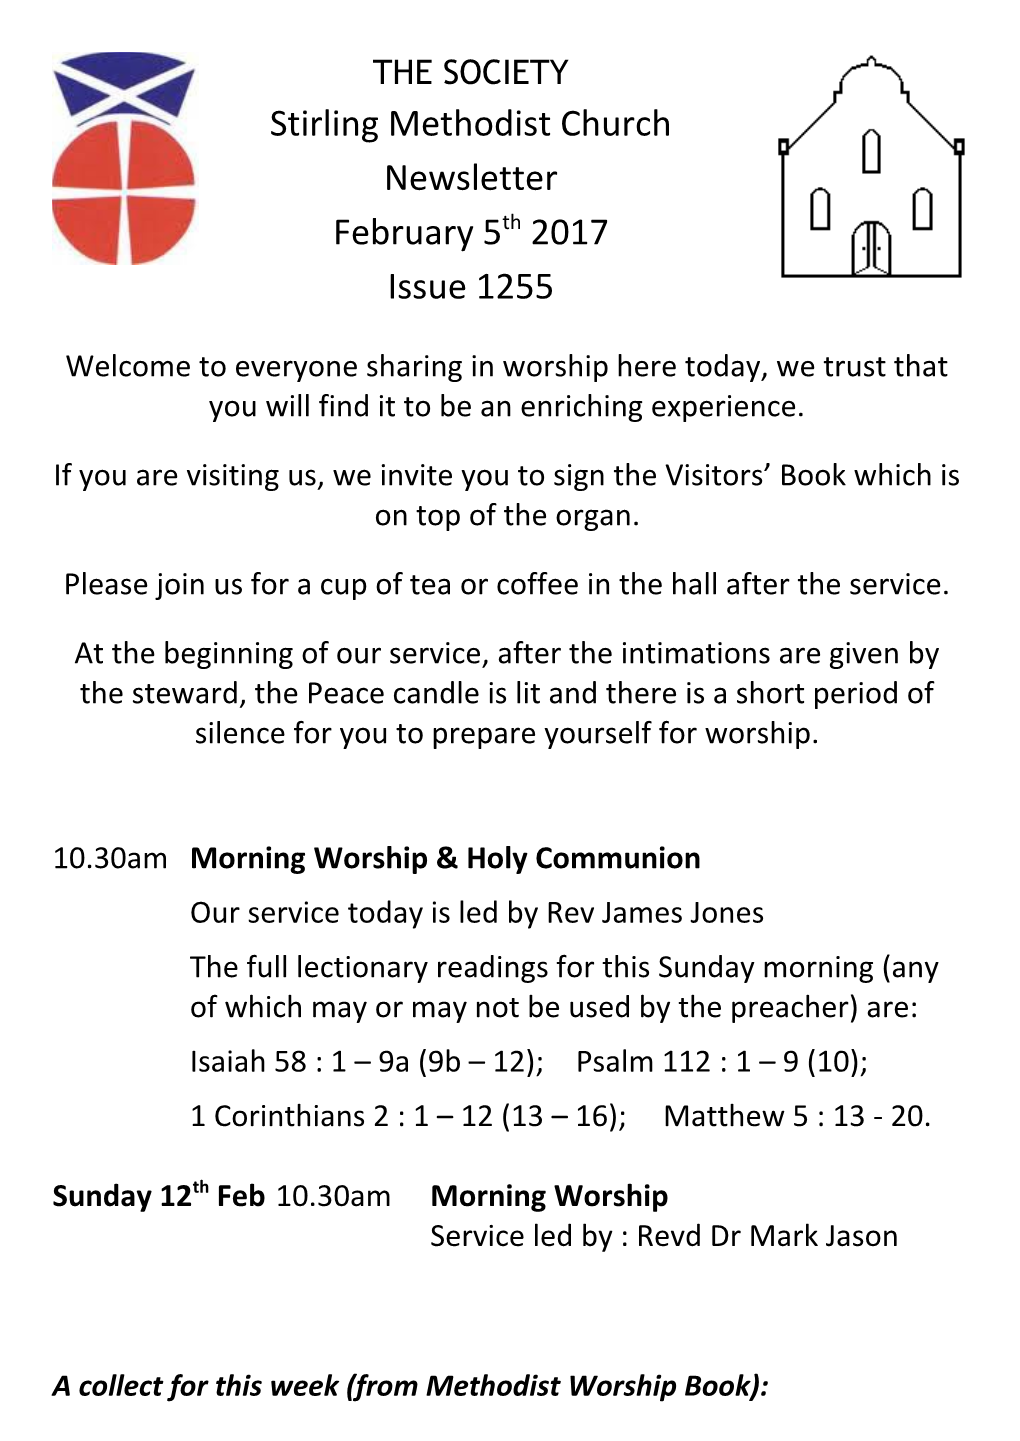 Please Join Us for a Cup of Tea Or Coffee in the Hall After the Service